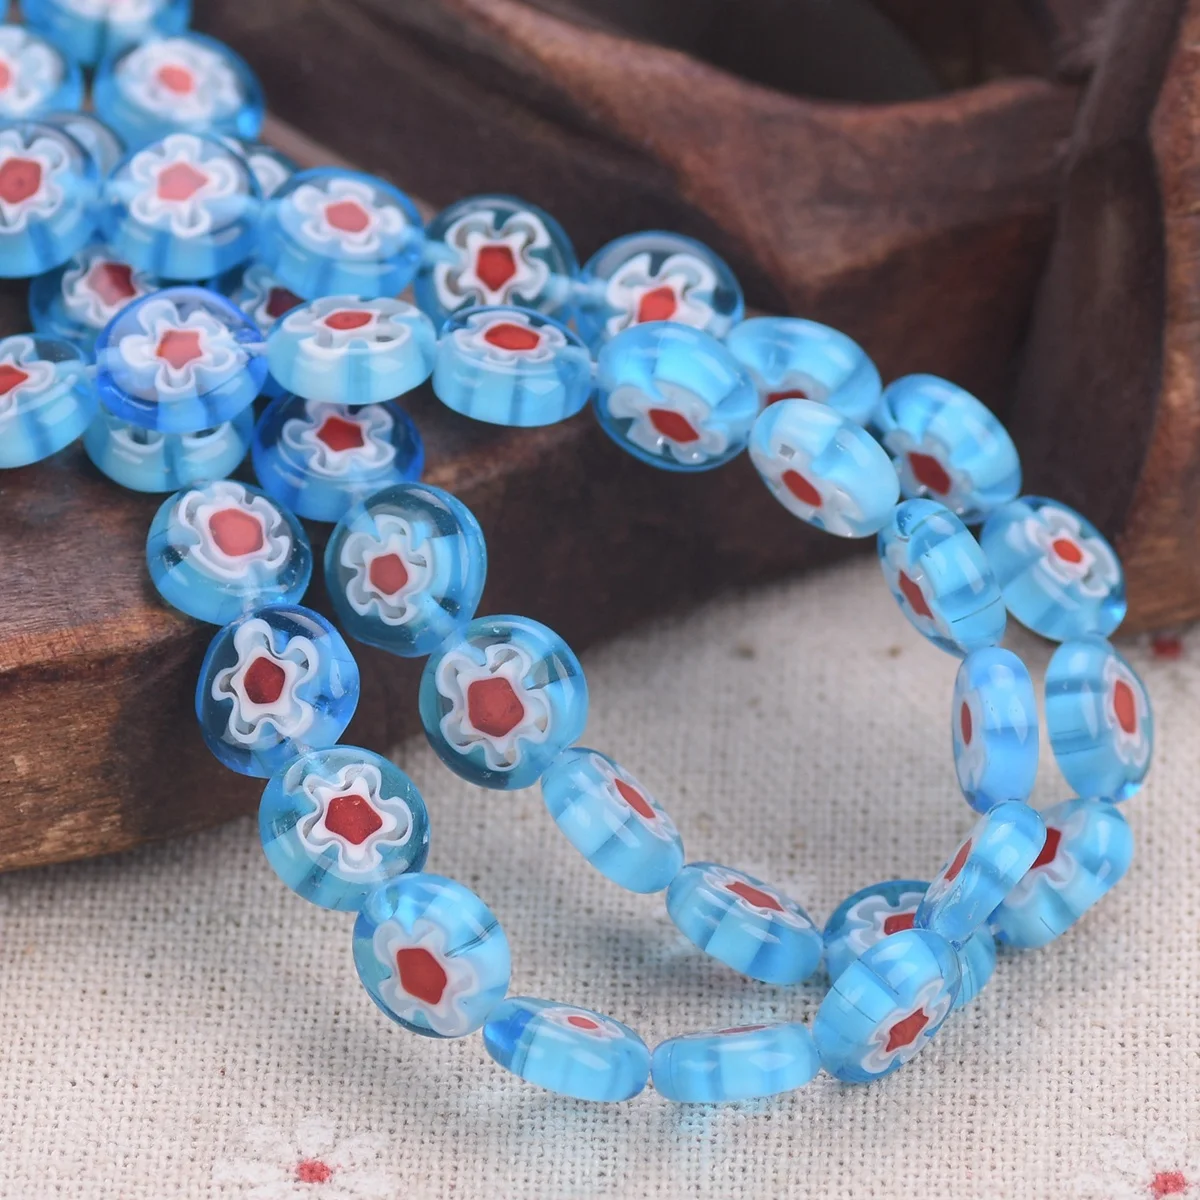 35pcs(1 Strand) Flat Round 10mm Lake Blue Flower Handmade Millefiori Glass Loose Beads Lot For Jewelry Making DIY Craft Findings shiny coated patterns round 6mm 8mm 10mm crystal glass loose beads for jewelry making diy craft findings